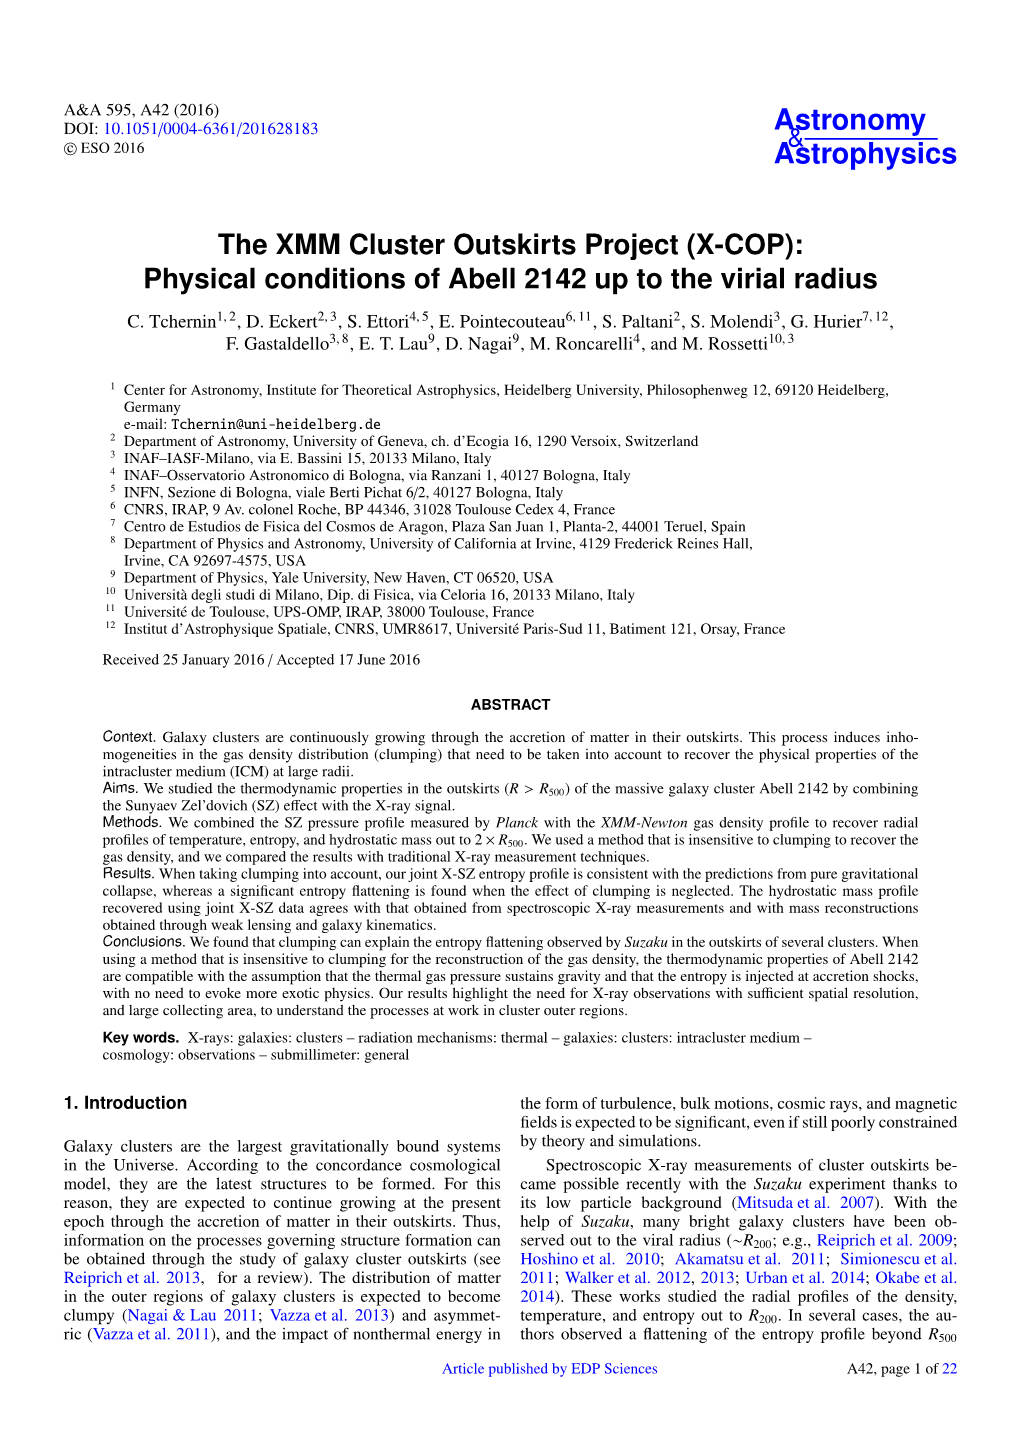 The XMM Cluster Outskirts Project (X-COP): Physical Conditions of Abell 2142 up to the Virial Radius C